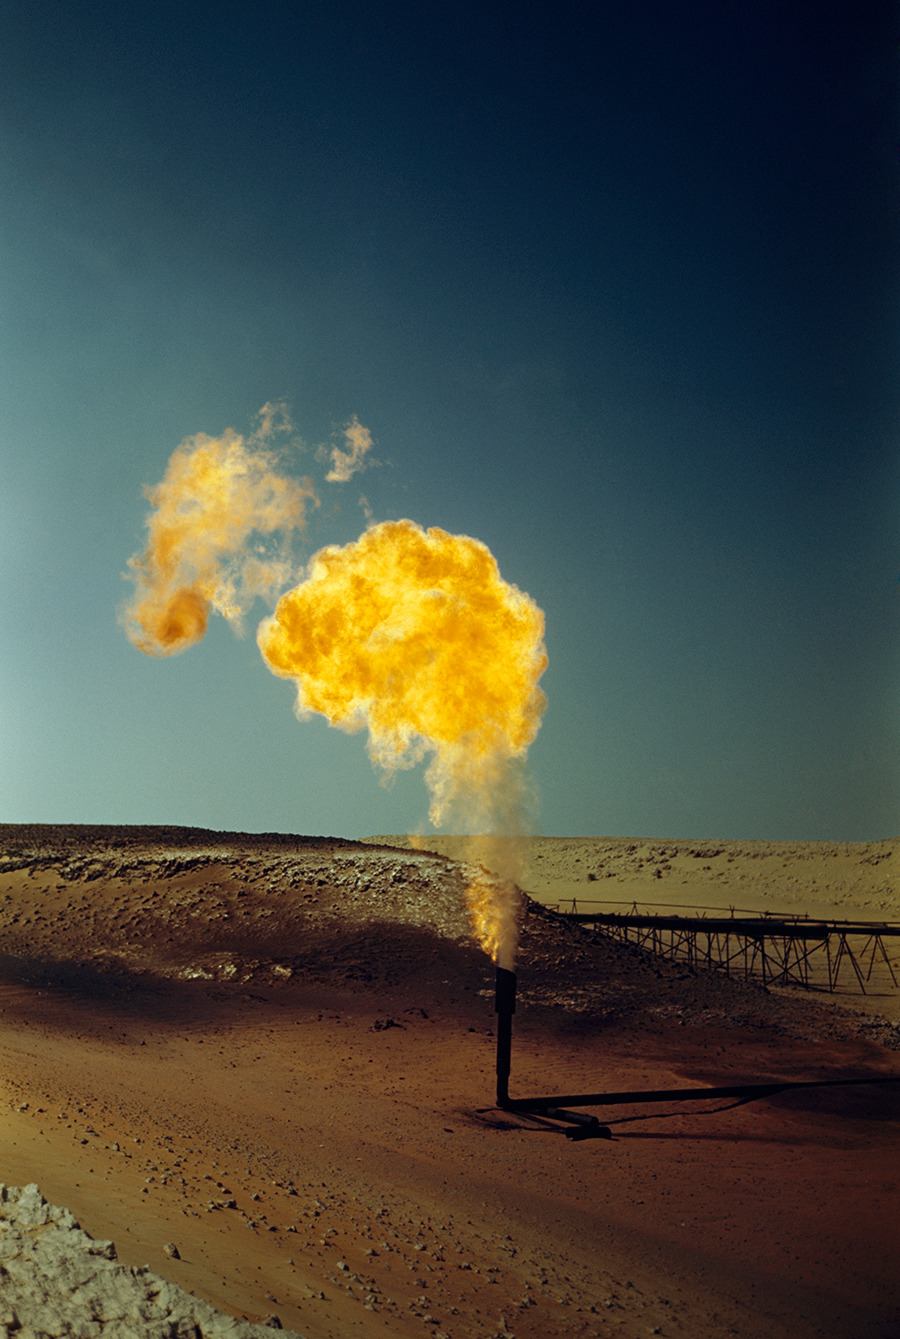 A pipe emits poisonous gases in a flame produced by oil production, April 1948.Photograph by Maynard Owen Williams, National Geographic